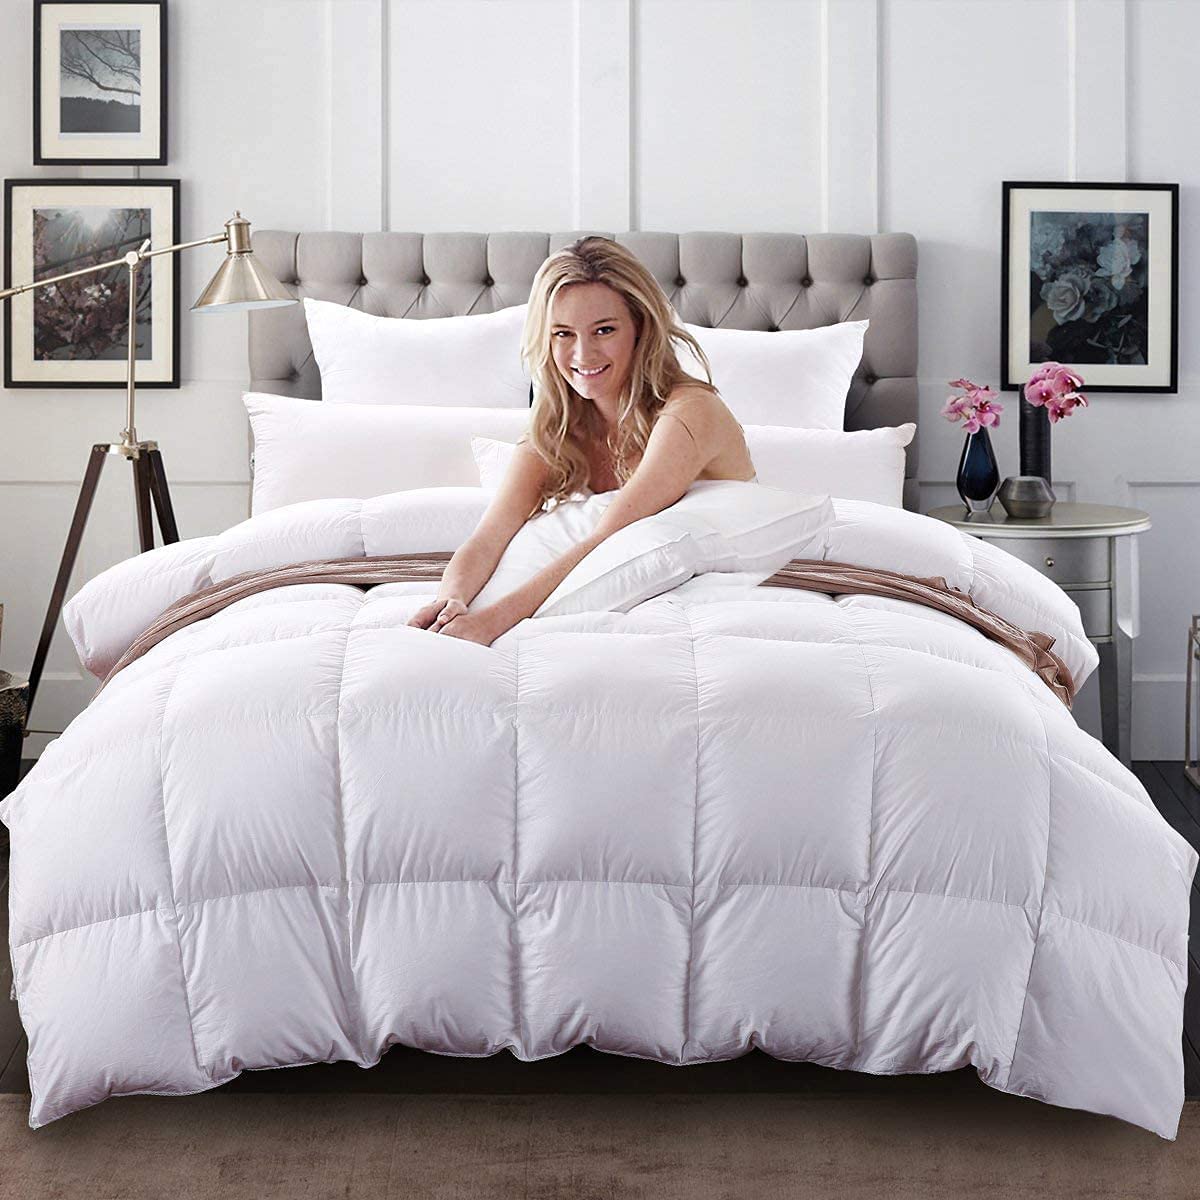 Price:$139.95  Luxurious Siberian White Goose Down Comforter King Size/California King Duvet Insert Heavy Warmth for Winter 100% Natural Cotton Shell 750 Fill Power 60oz Fill Weight White Solid : Home & Kitchen